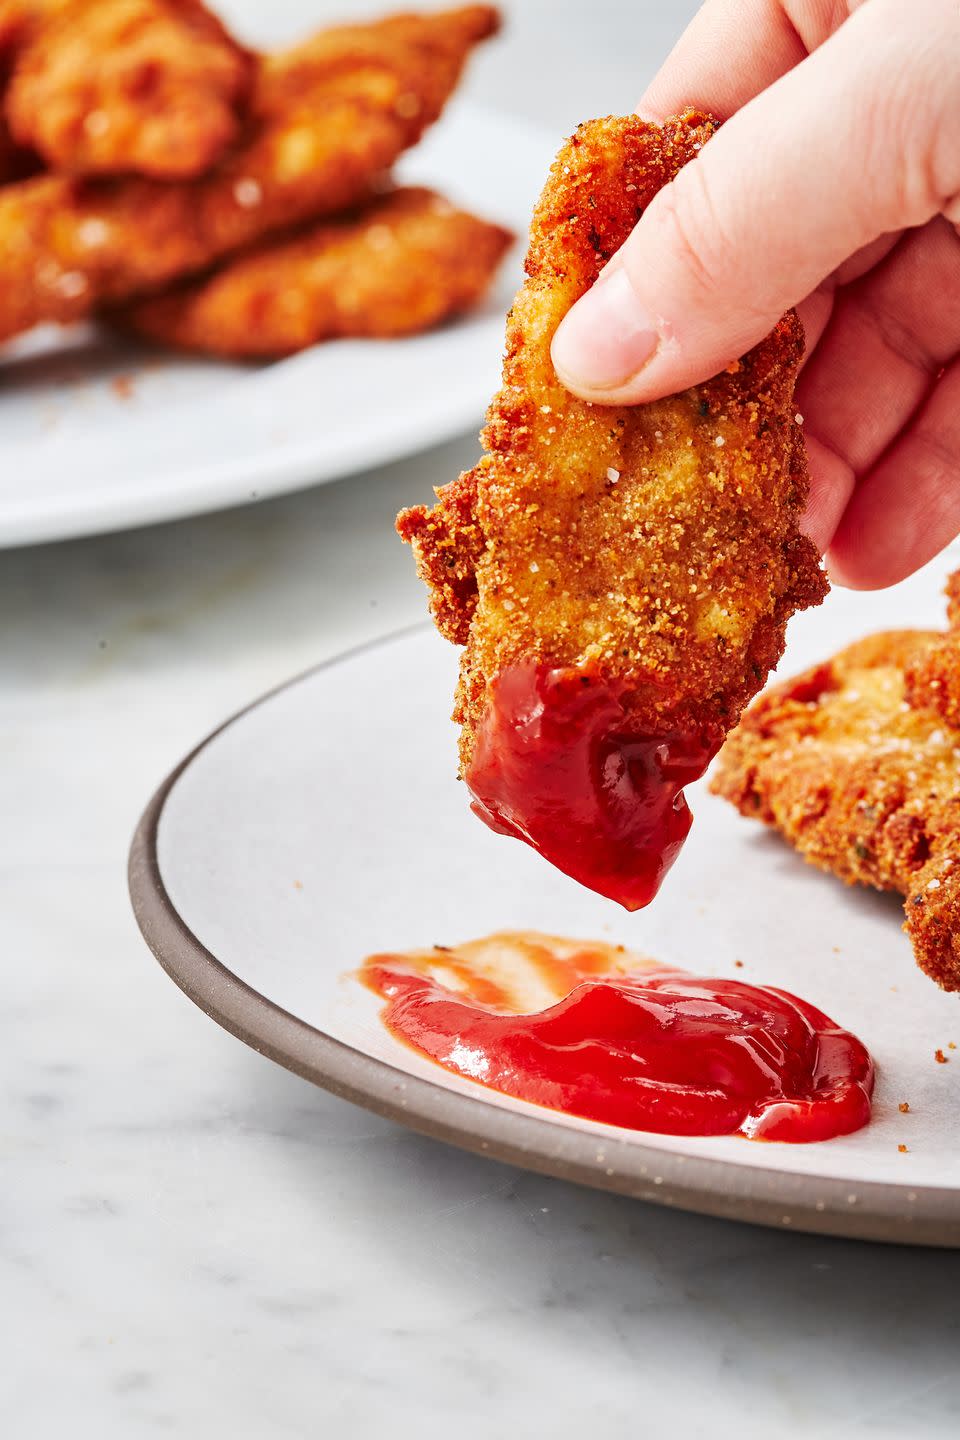 <p>Fried chicken strips take us right back to our childhood. This homemade version makes the tenders so much better—make some <a href="https://www.delish.com/cooking/recipe-ideas/a23361078/how-to-make-french-fries/" rel="nofollow noopener" target="_blank" data-ylk="slk:homemade fries" class="link ">homemade fries</a> to go along with them!</p><p>Get the <strong><a href="https://www.delish.com/cooking/recipe-ideas/a29791014/fried-chicken-strips-recipe/" rel="nofollow noopener" target="_blank" data-ylk="slk:Fried Chicken Strips recipe" class="link ">Fried Chicken Strips recipe</a></strong>.</p>